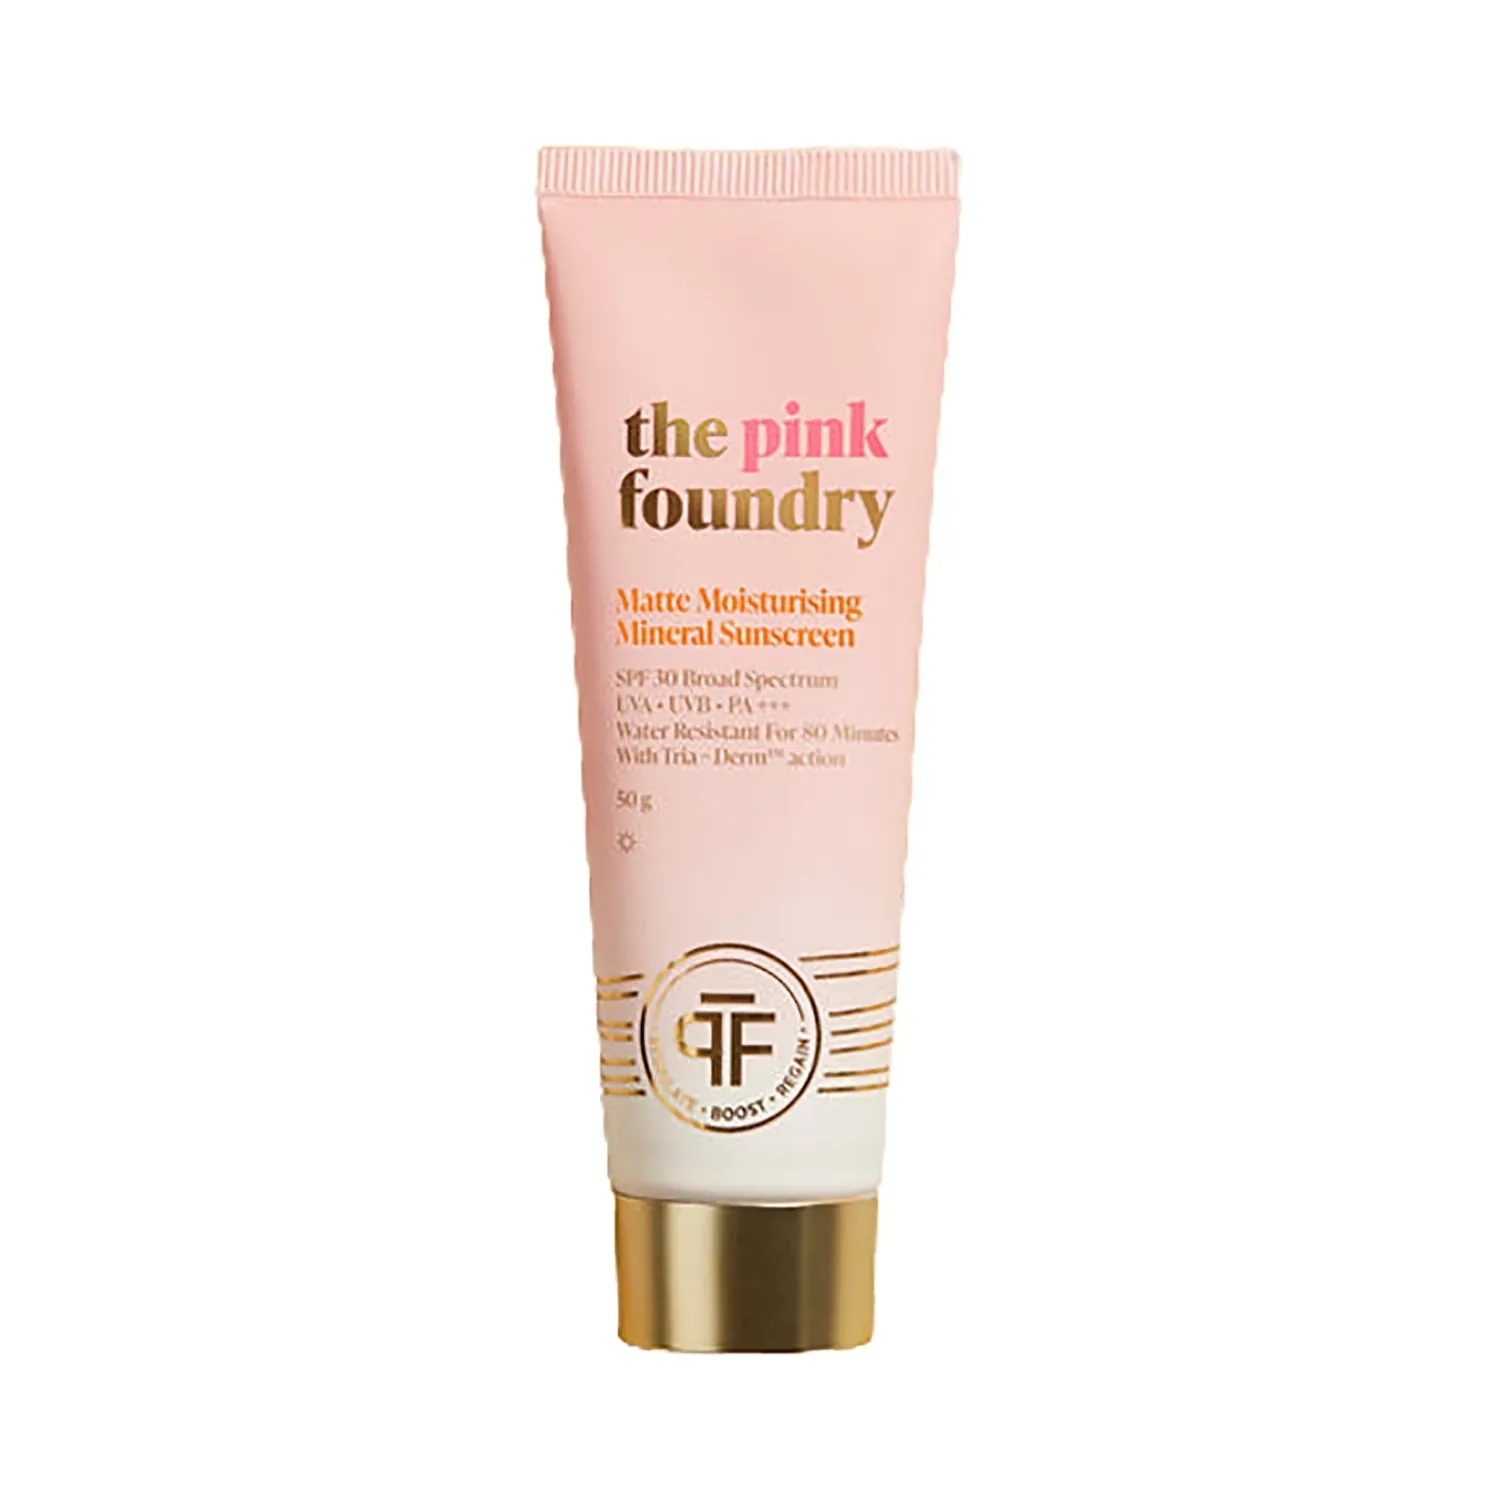 The Pink Foundry | The Pink Foundry Matte Moisturising Mineral Sunscreen (50g)